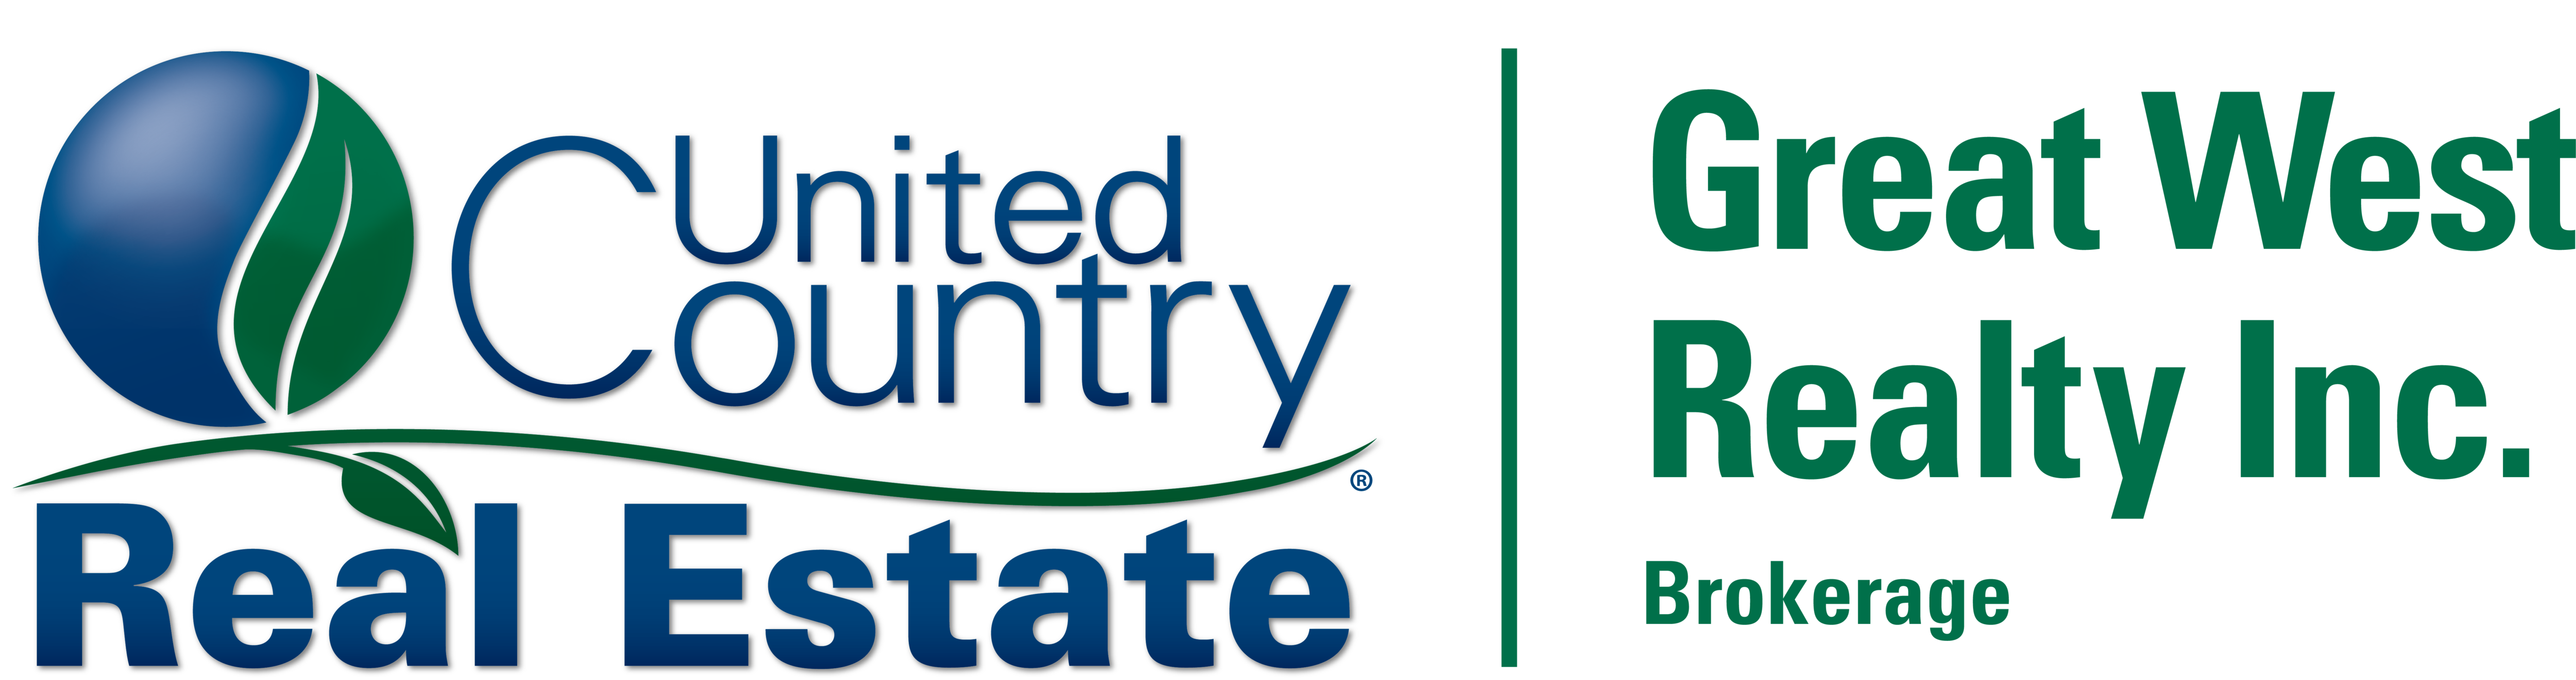 United Country Real Estate - Great West Realty